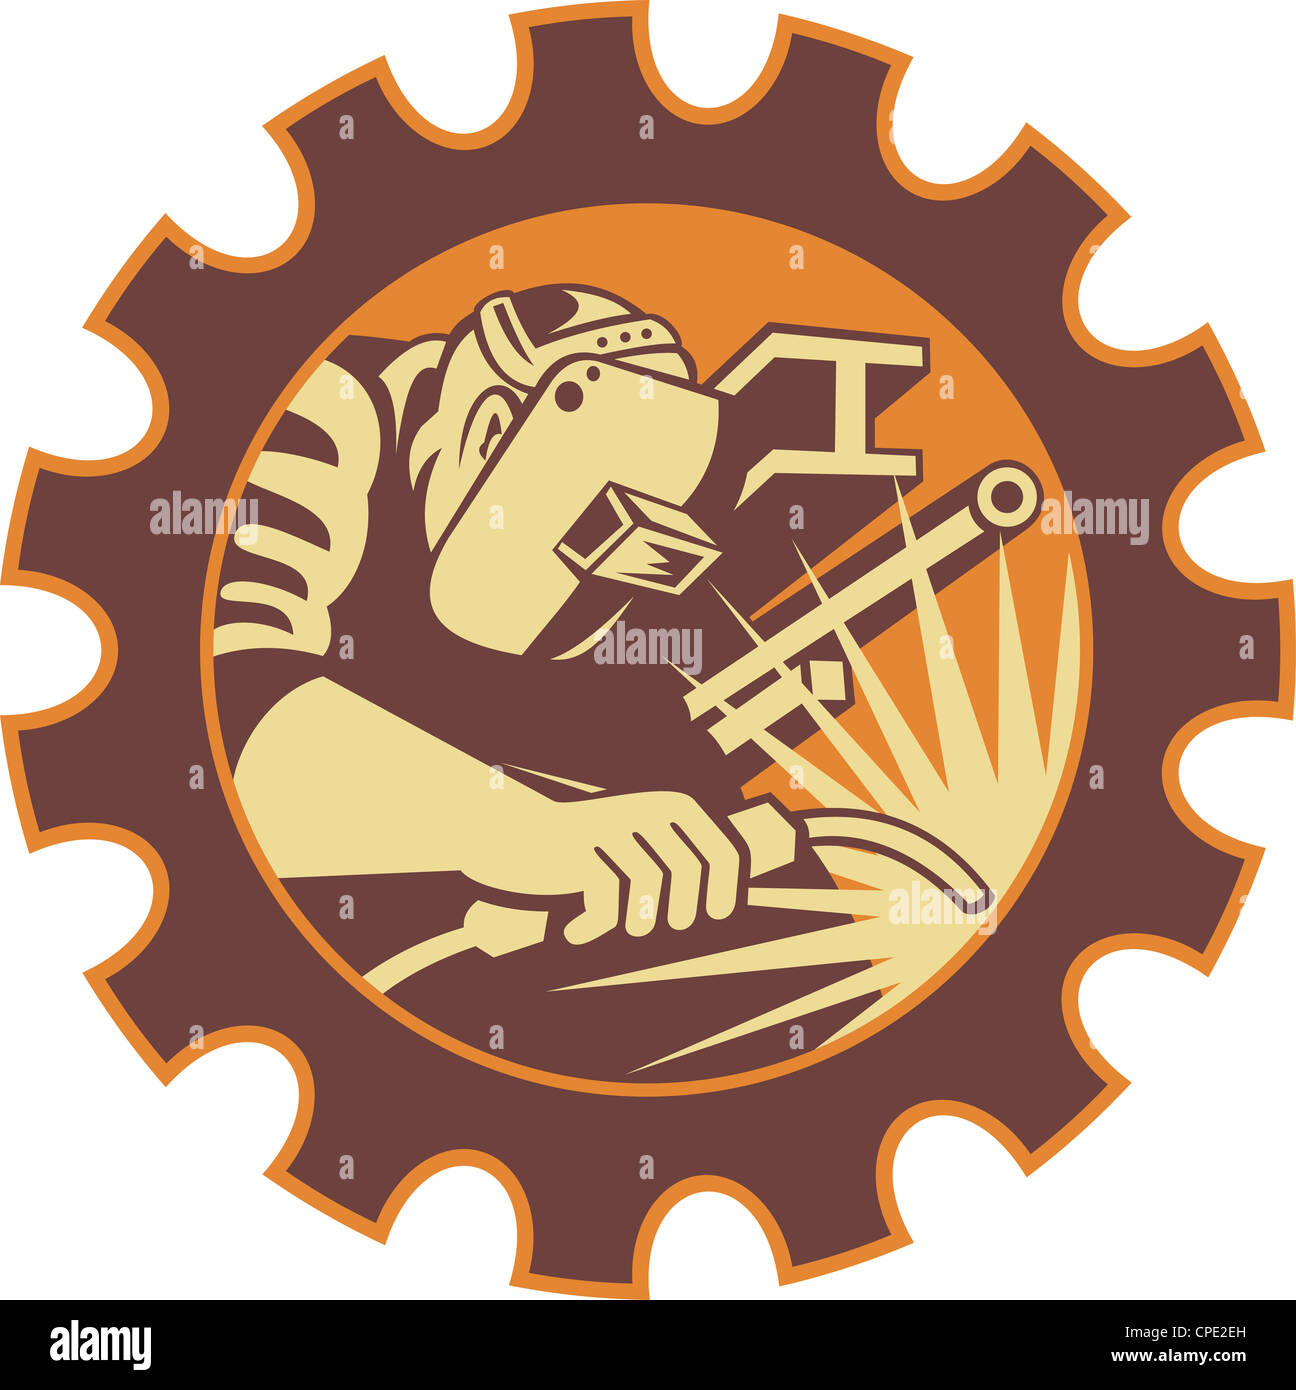 Illustration of a welder fabricator worker welding torch with i-beam pipe and bar set inside gear done in retro style. Stock Photo